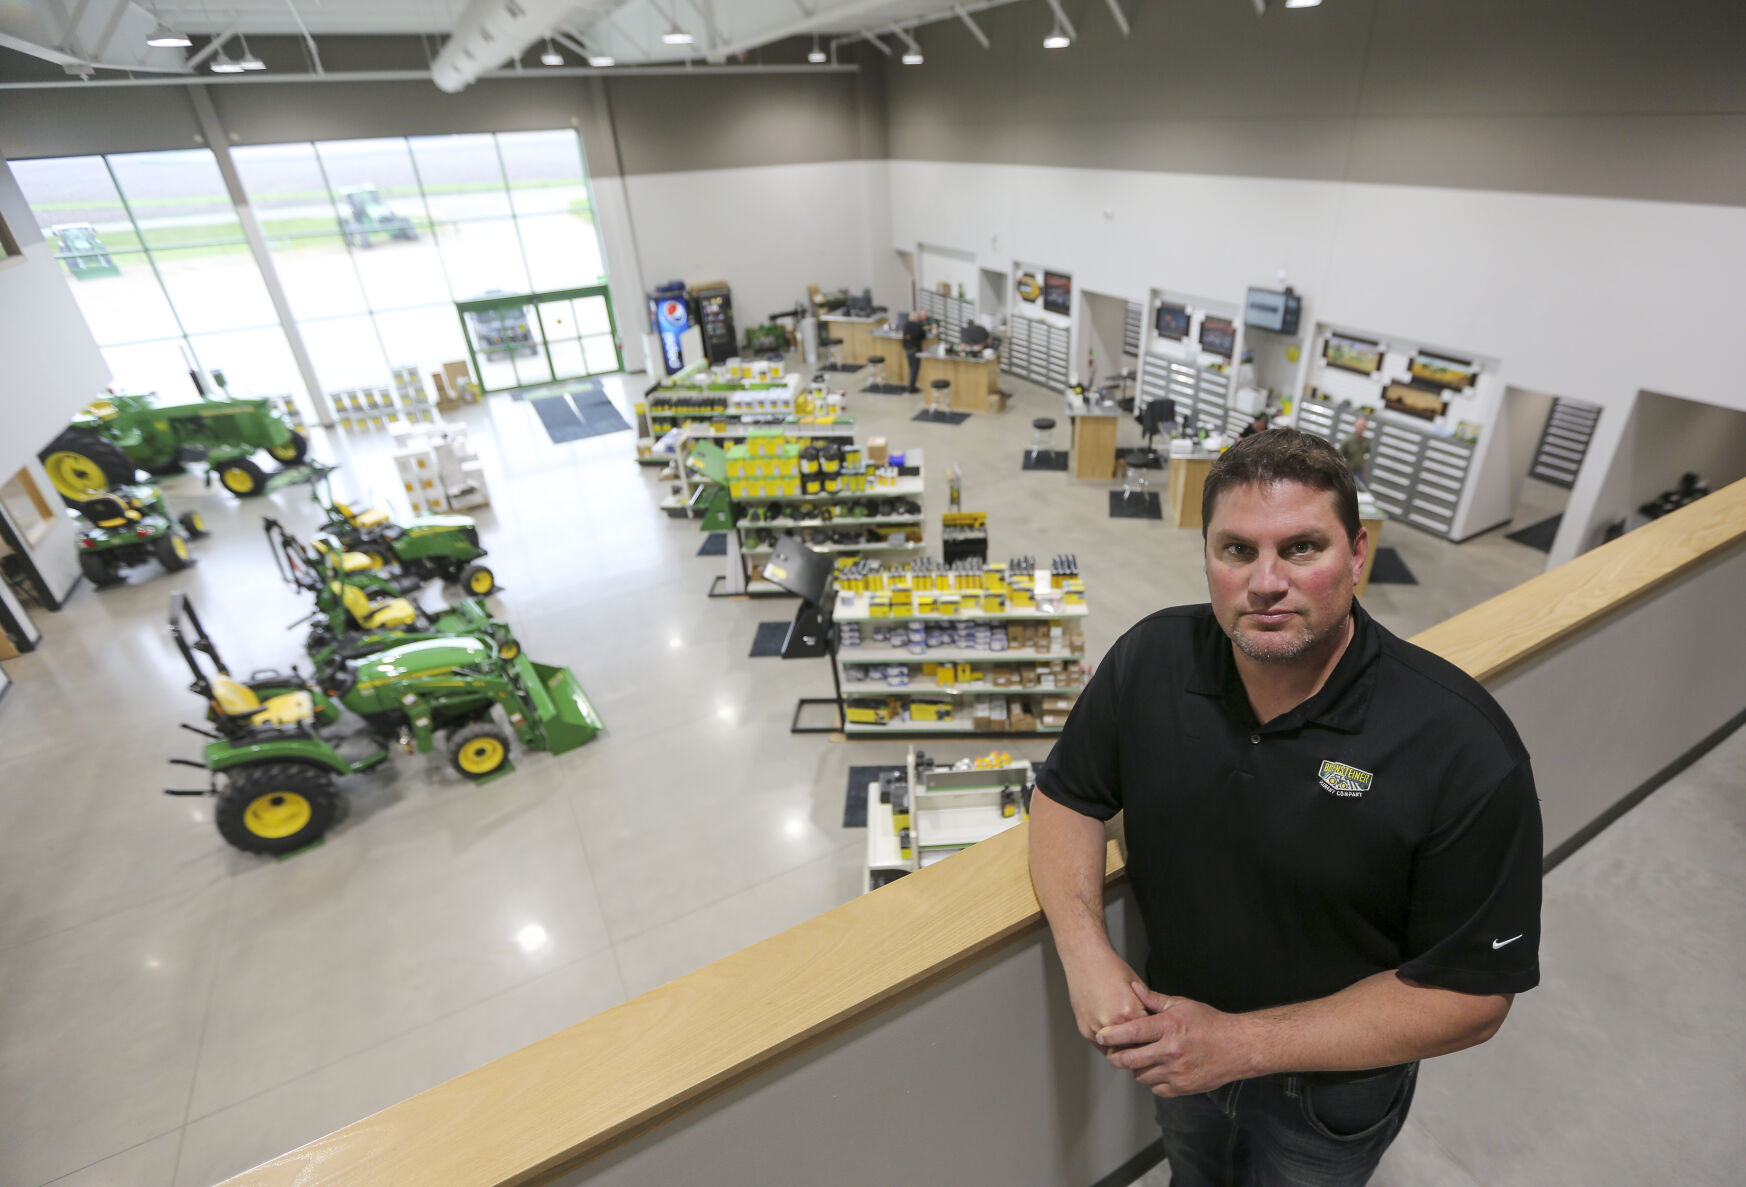 Bret Haughenbury is the manager at Bodensteiner Implement Co. in Dyersville, Iowa, which is now the largest of the 10 Bodensteiner locations in northeast Iowa.    PHOTO CREDIT: Dave Kettering